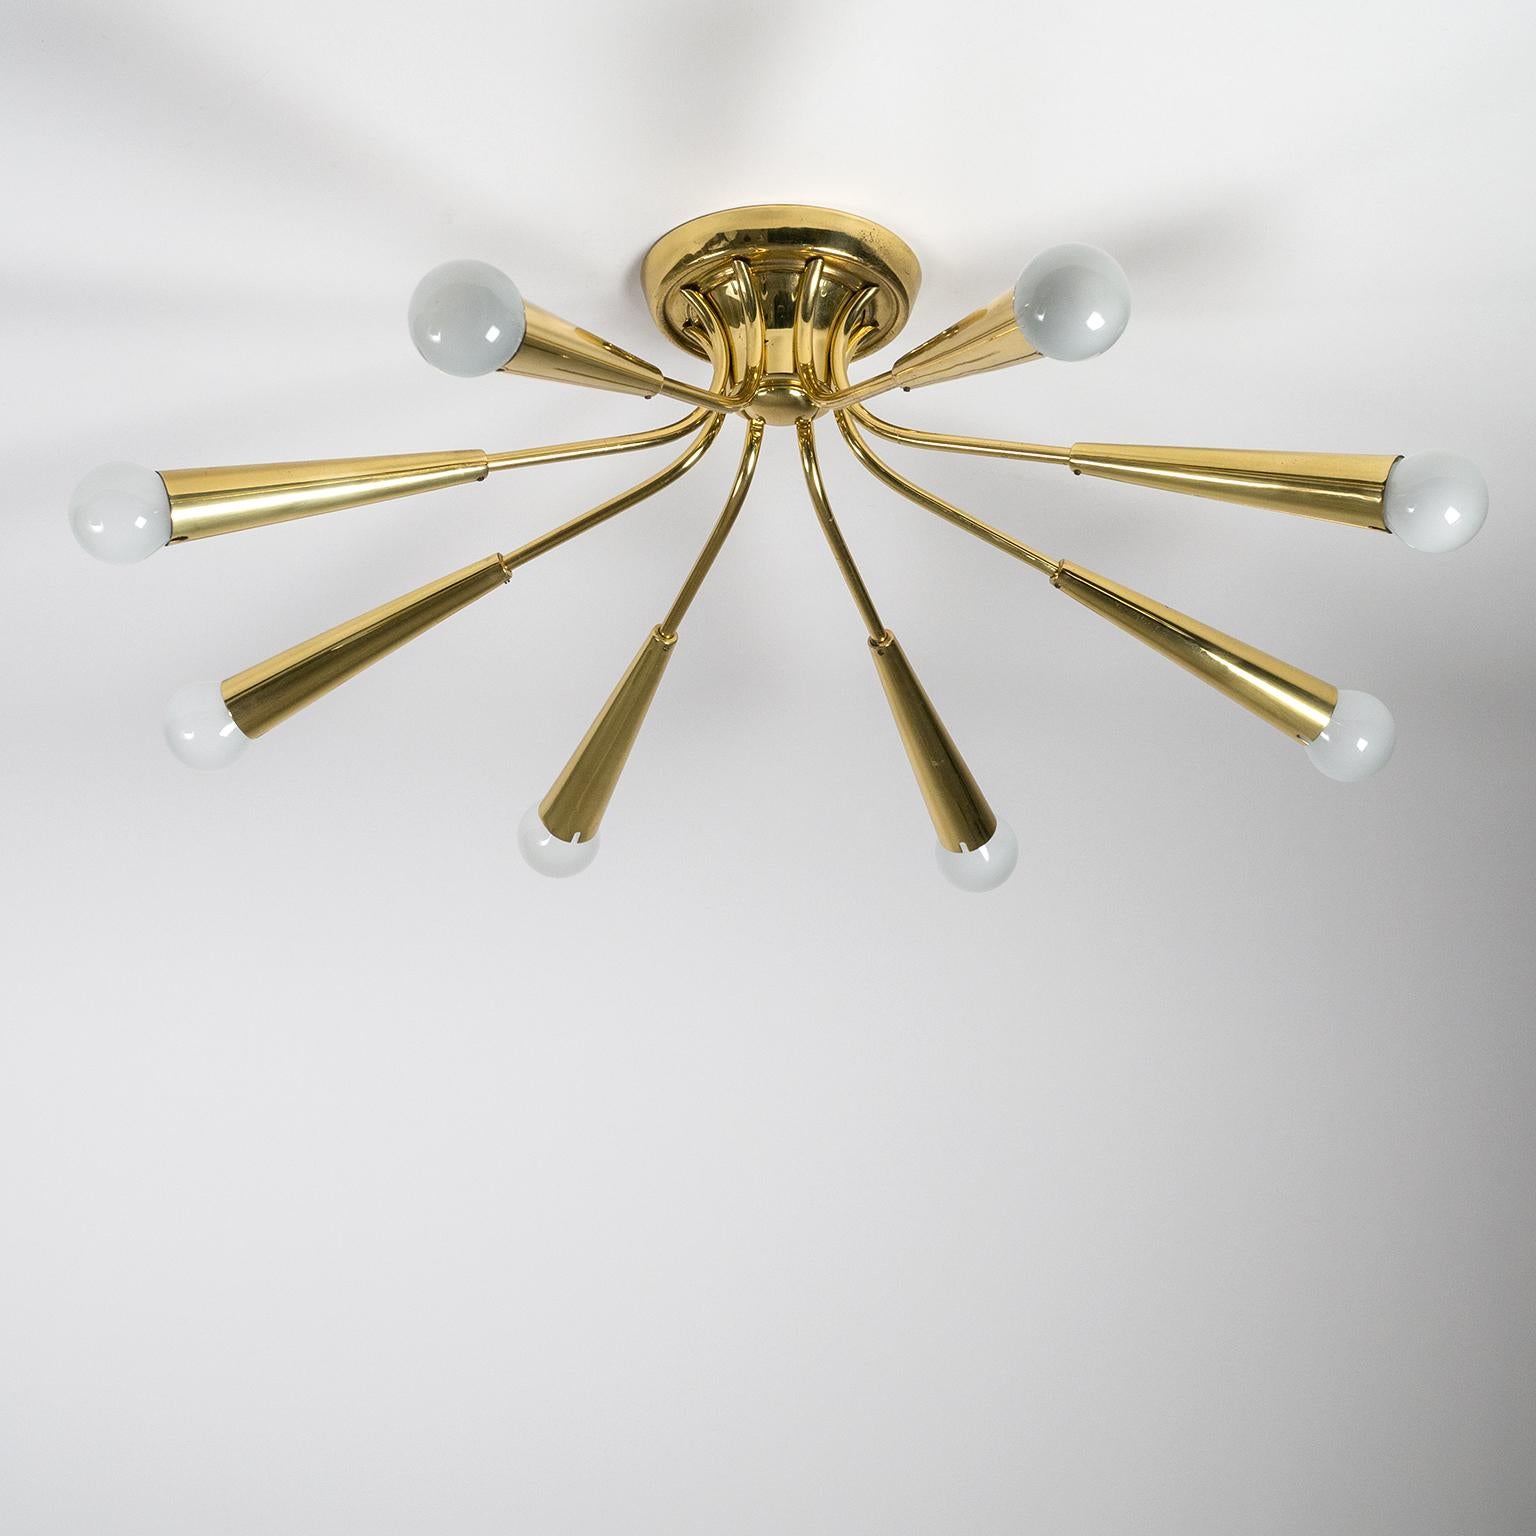 Elegant eight-arm brass sputnik flush mount from Germany, 1960s. Perfectly suited for low ceiling environments that require a high light output. Very good original condition with just a touch of patina. Each arm has one original brass E14 socket